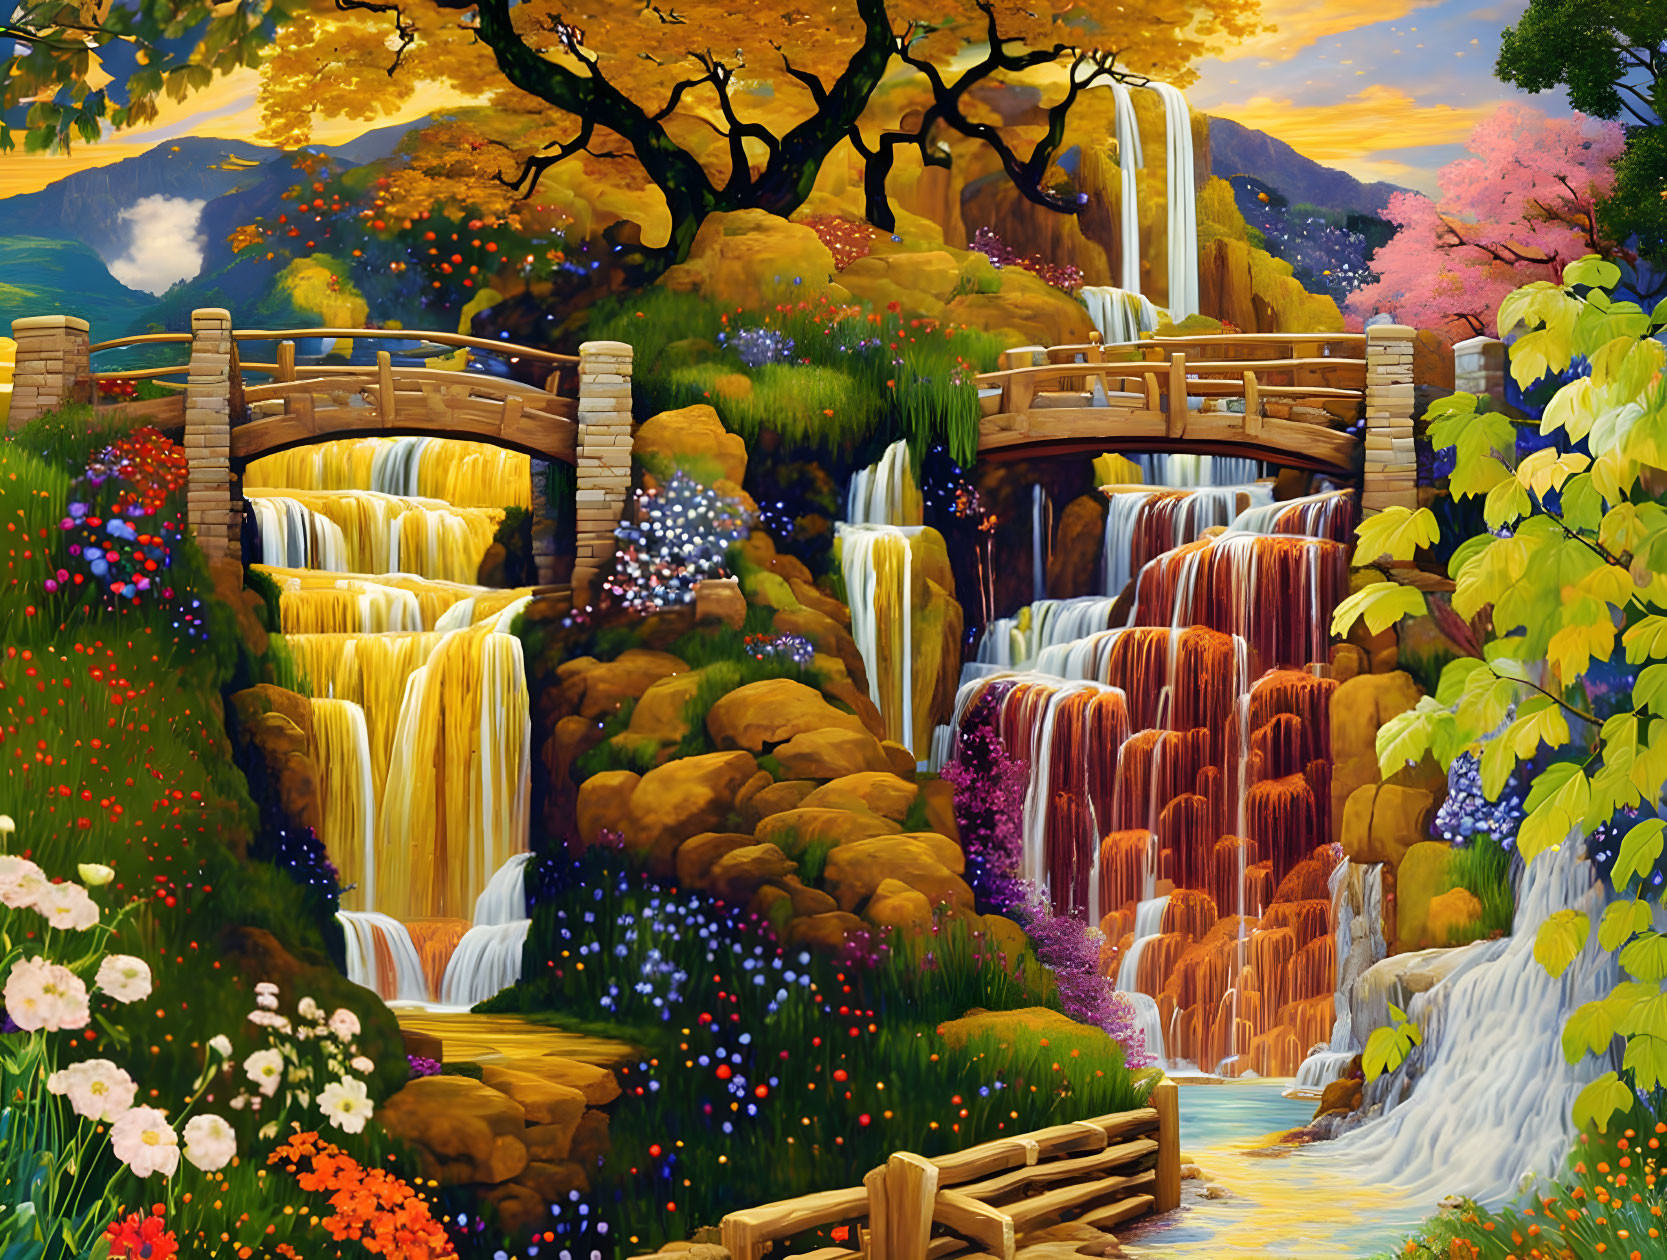 Colorful autumn waterfall painting with wooden bridges & sunset sky